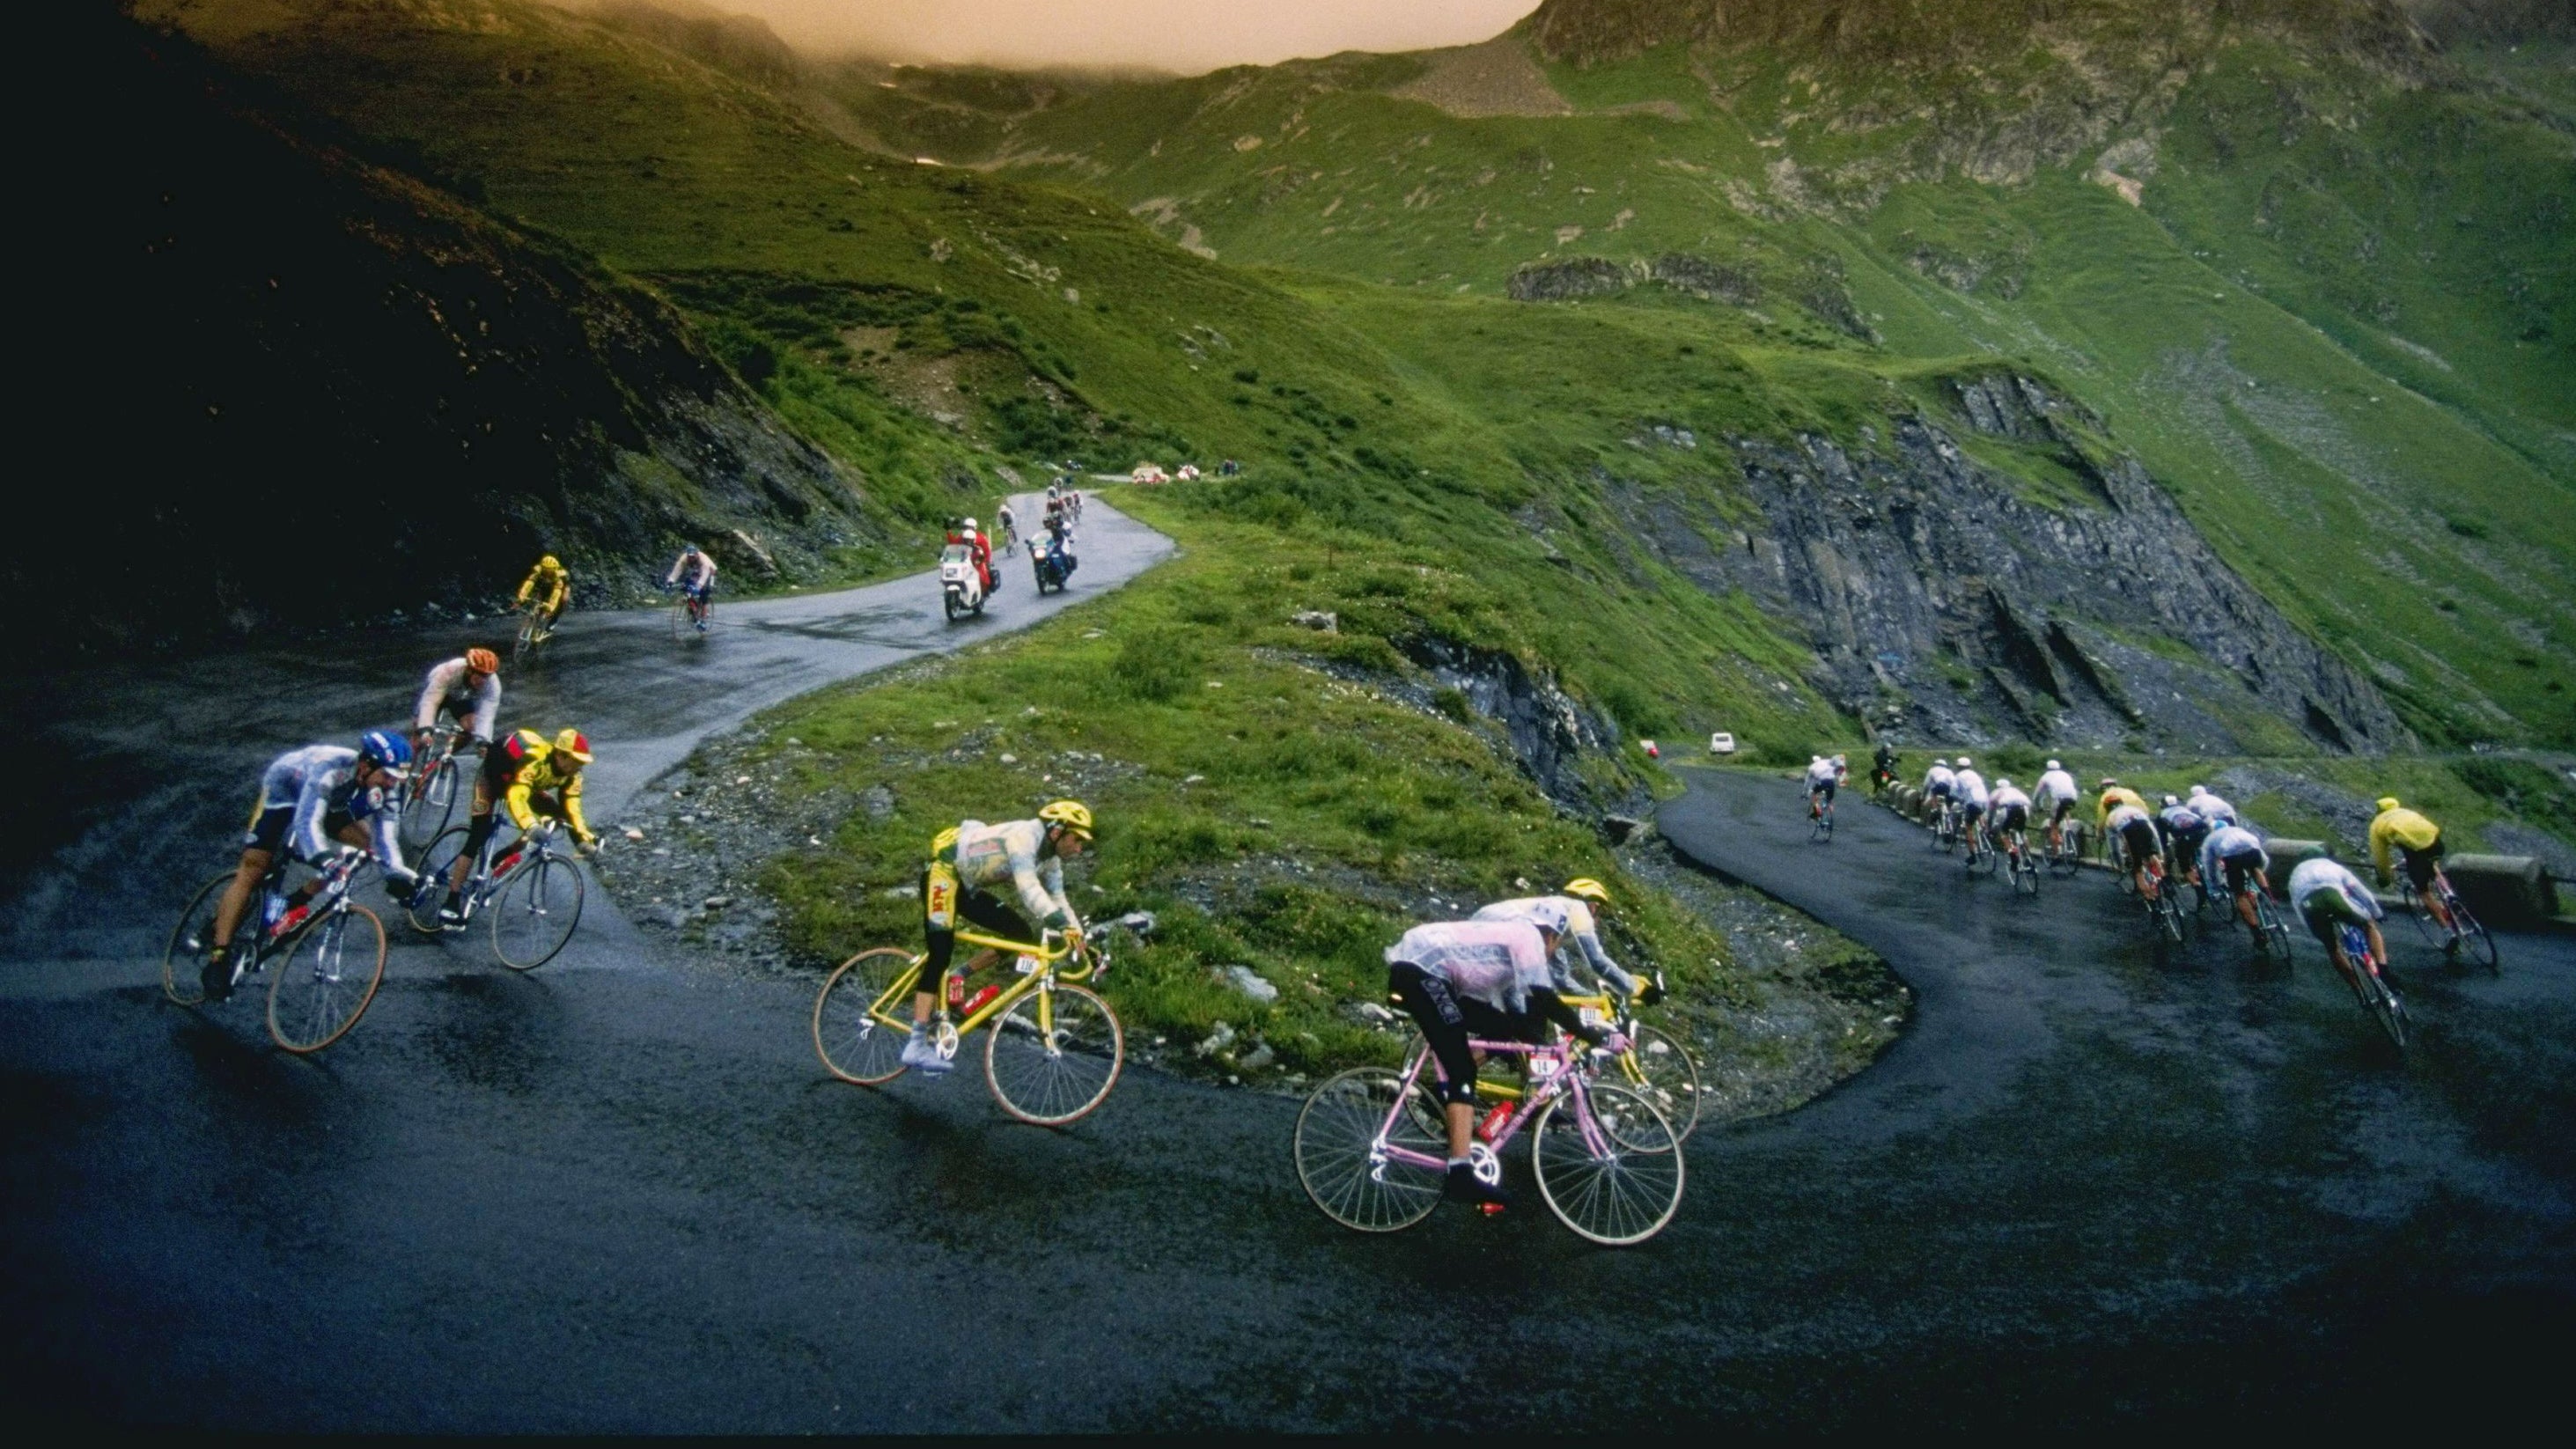 The Birth of the Tour de France